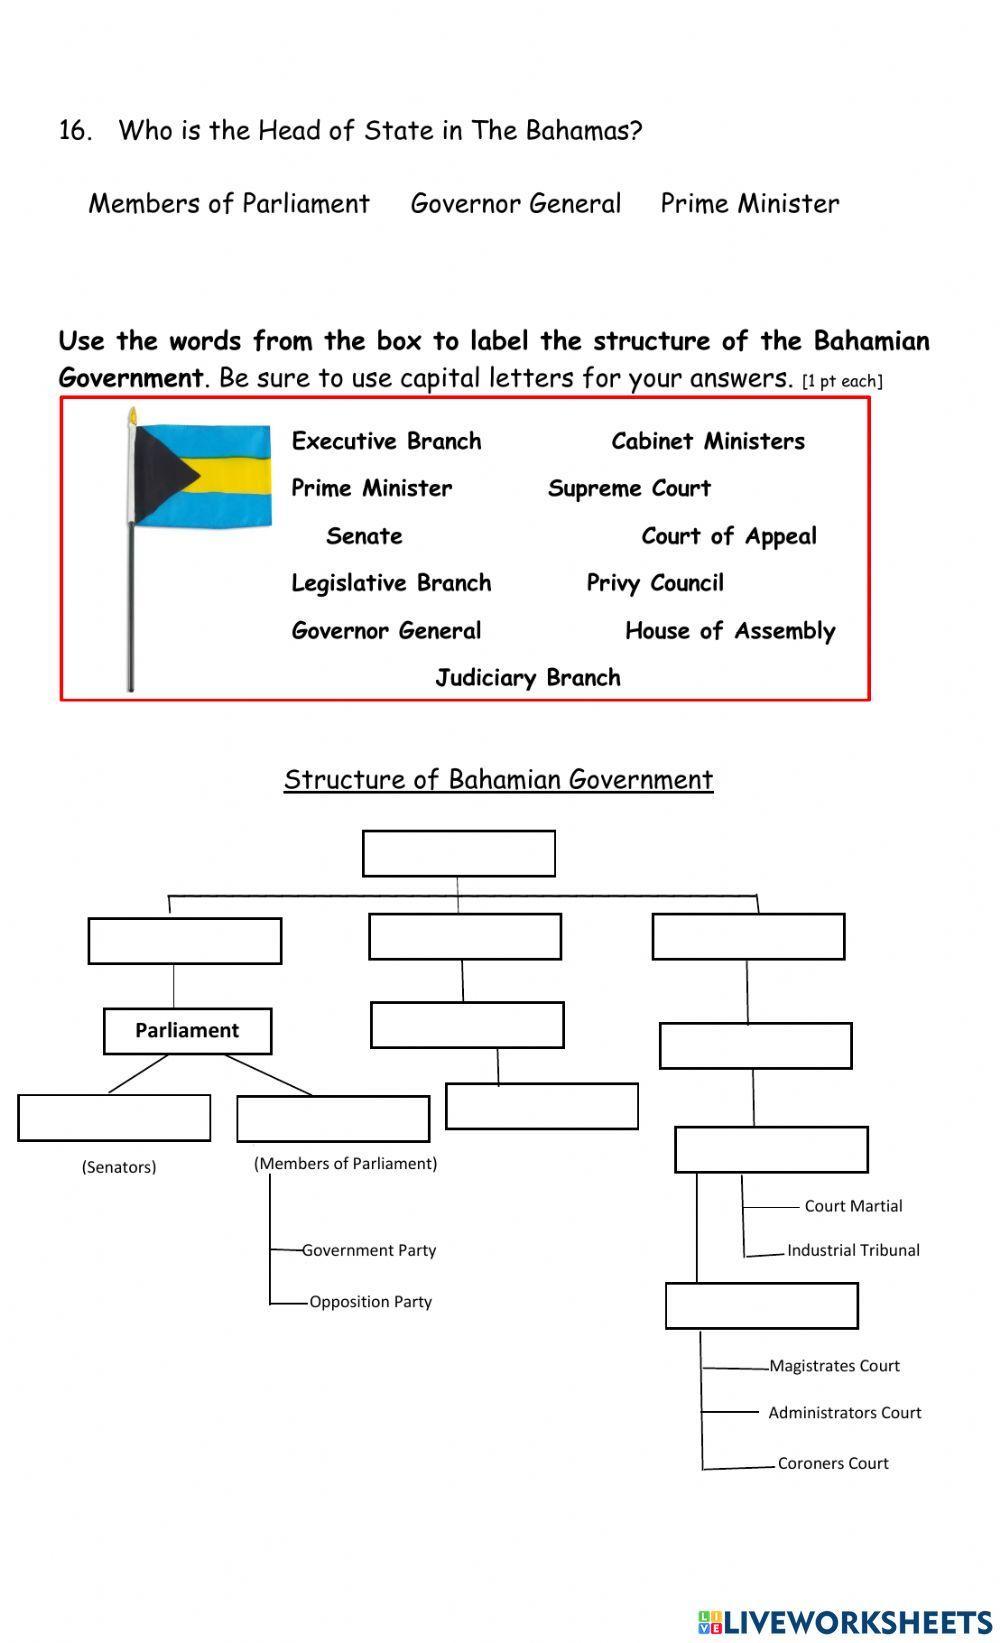 Branches of Government - Bahamas